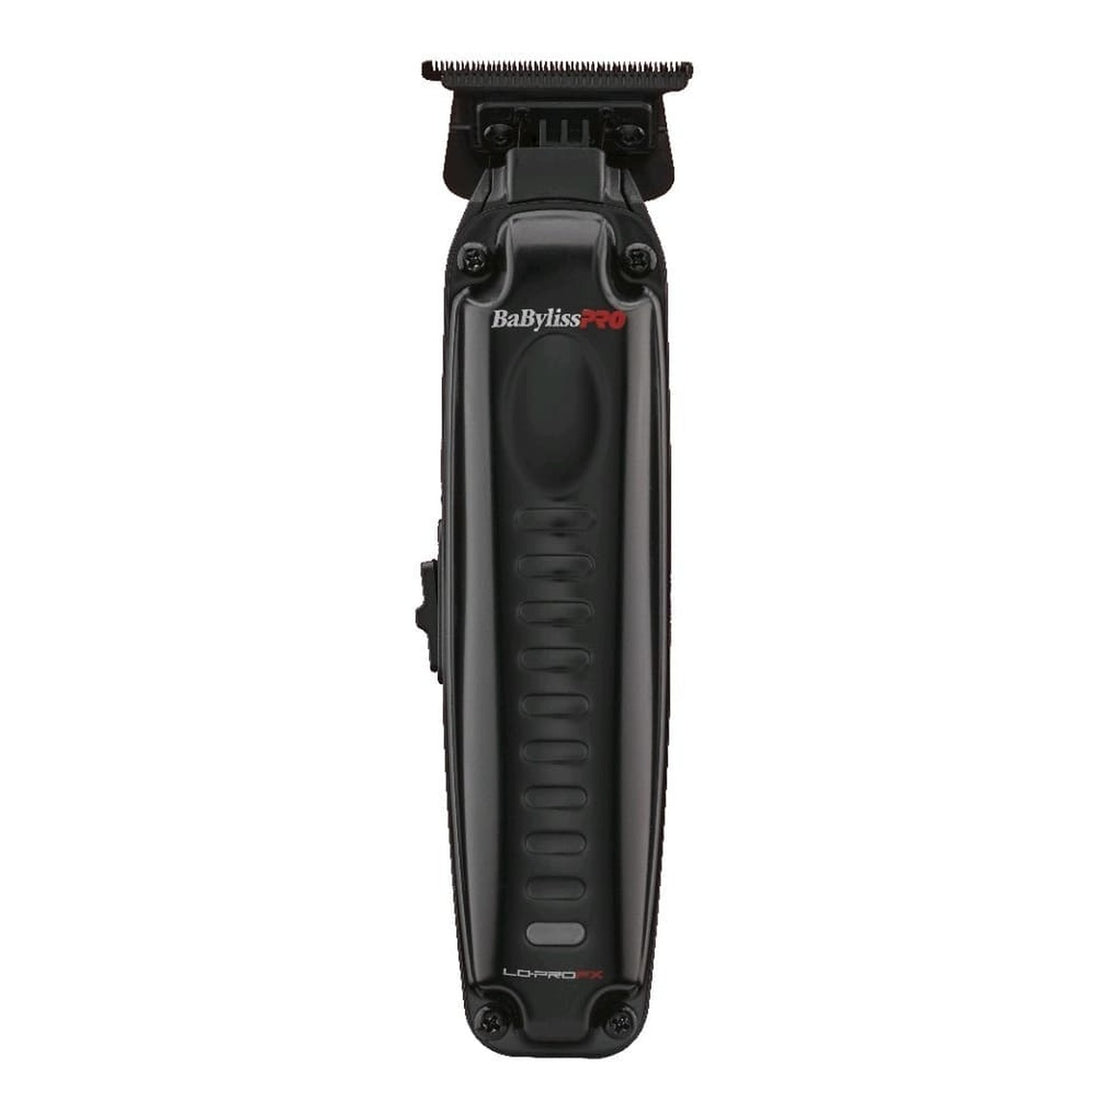 Babyliss Lo-Pro FX Trimmer